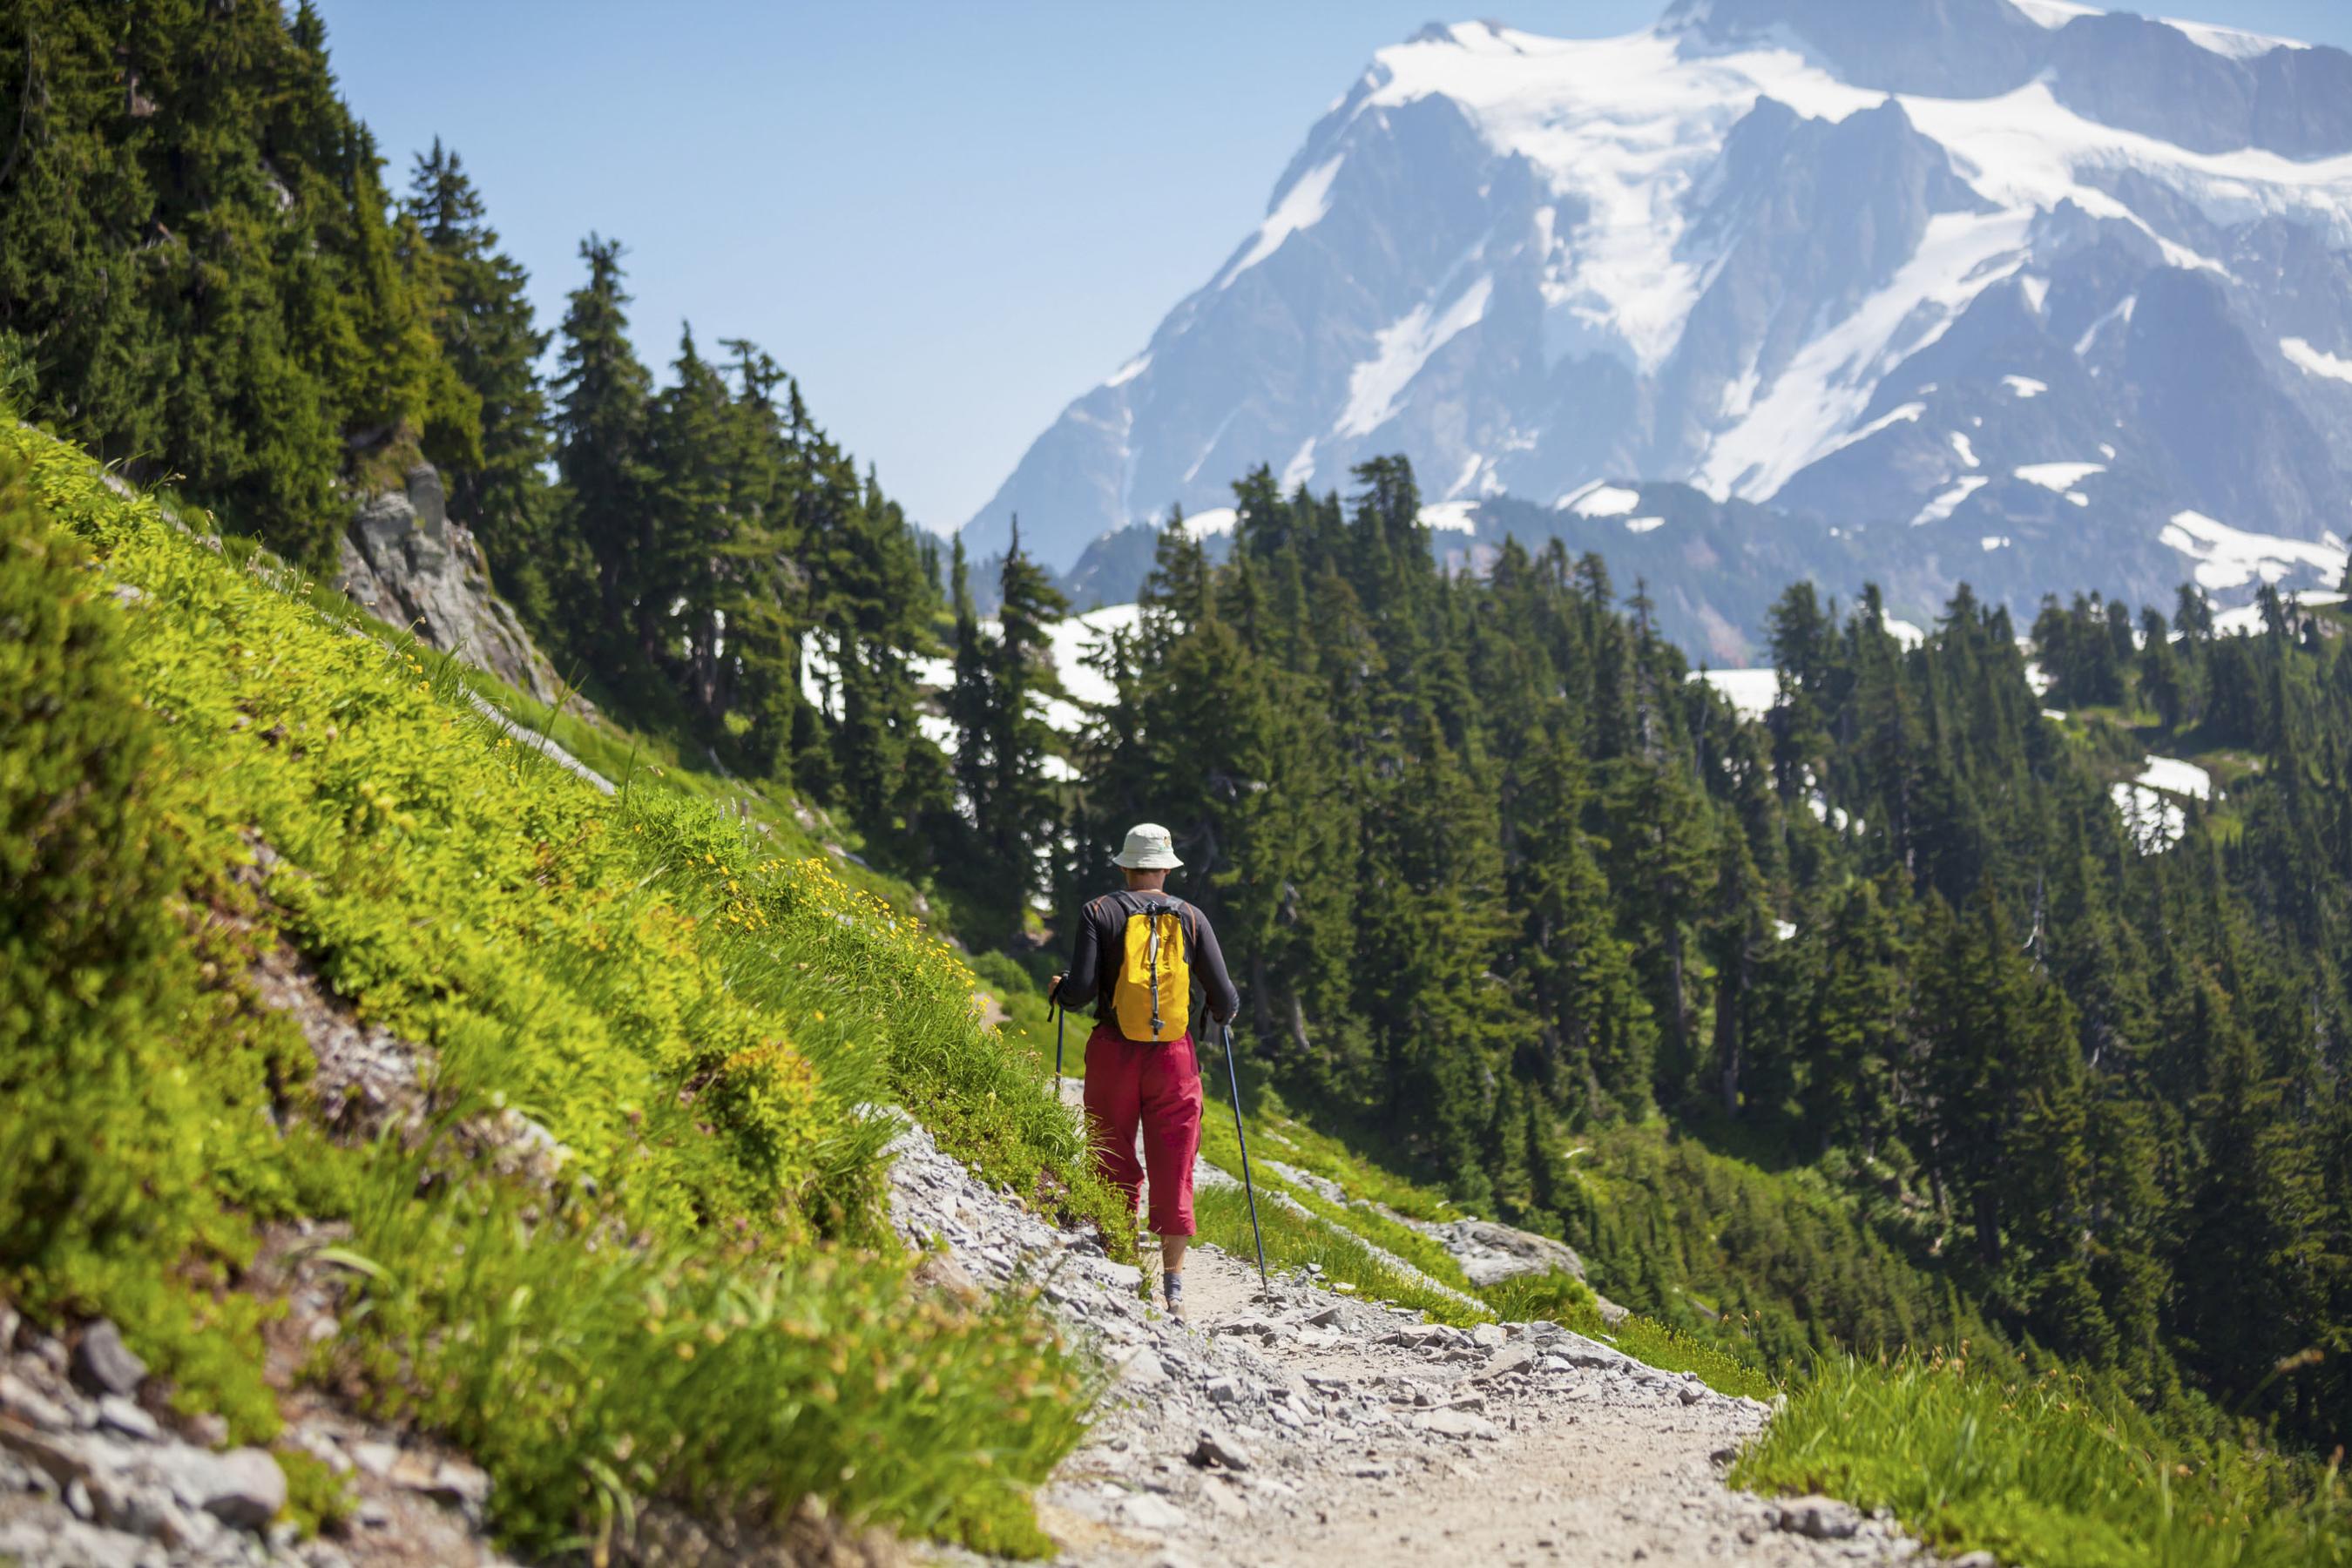 North Cascades National Park Photo Gallery Fodor’s Travel